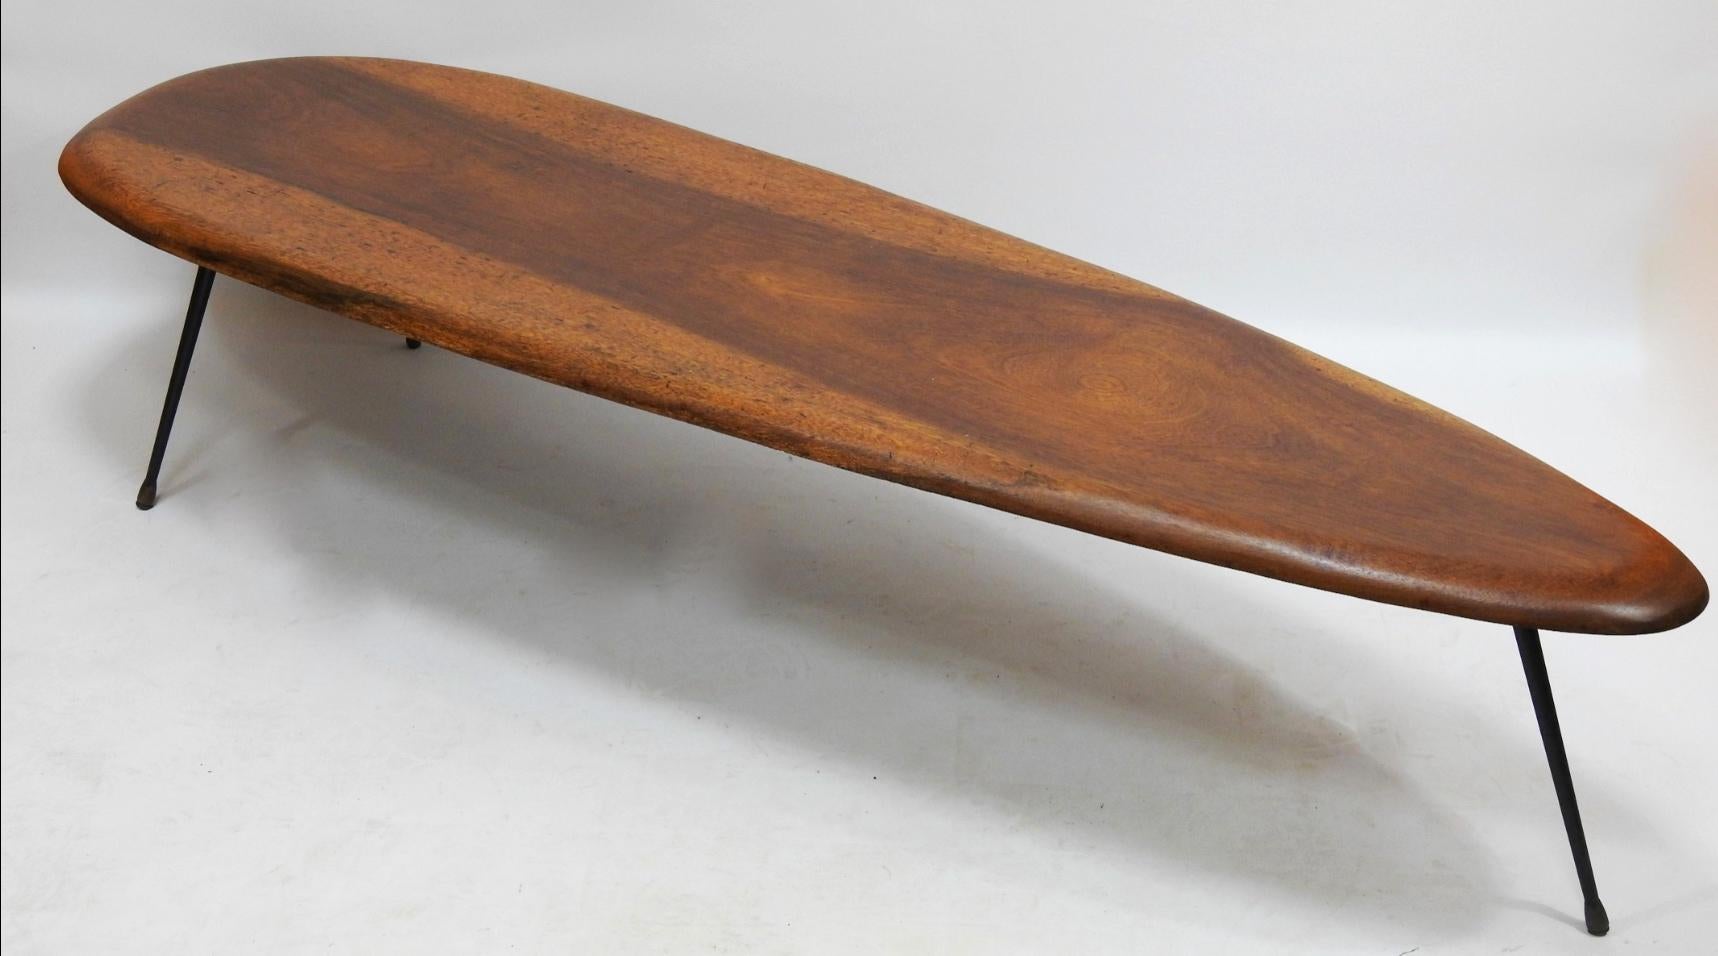 Oblong form for this anonyme coffee table from the 50's with wood top and 3 black metal feet.